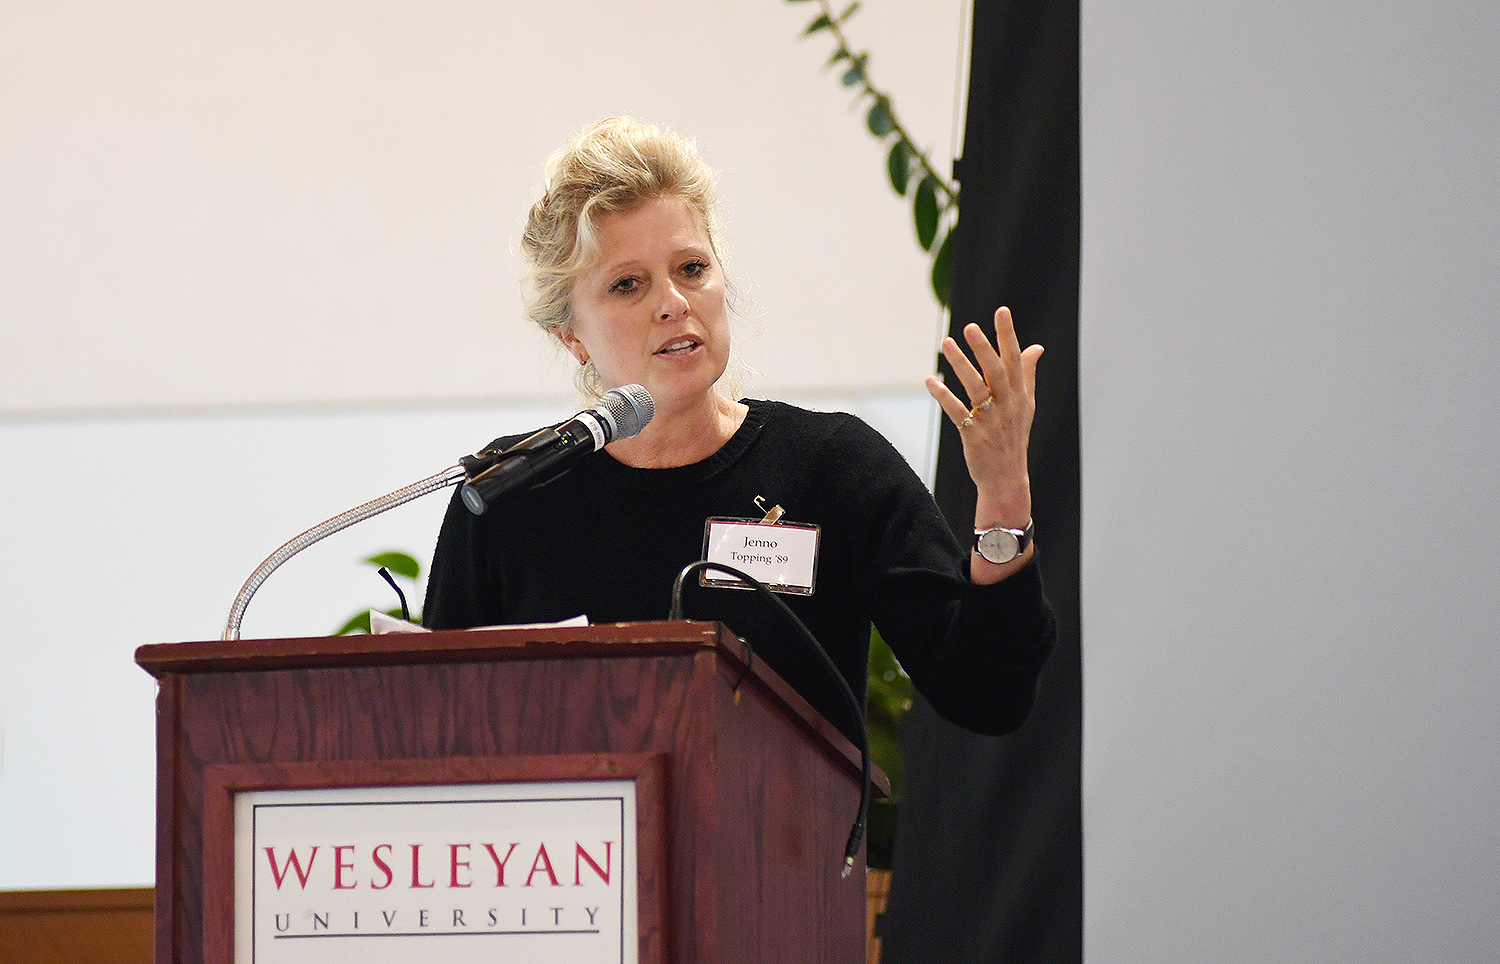 Oscar-nominated producer Jenno Topping '89, president of Film and Television at Chernin Entertainment, delivered the Alumni Keynote Speech on April 13. Topping has been involved in numerous feature films during her tenure at Charnin Entertainment including: Hidden Figures, The Greatest Showman, War for the Planet of the Apes, Red Sparrow, The Mountain Between Us, Miss Peregrine’s Home for Peculiar Children,The Heat and more.